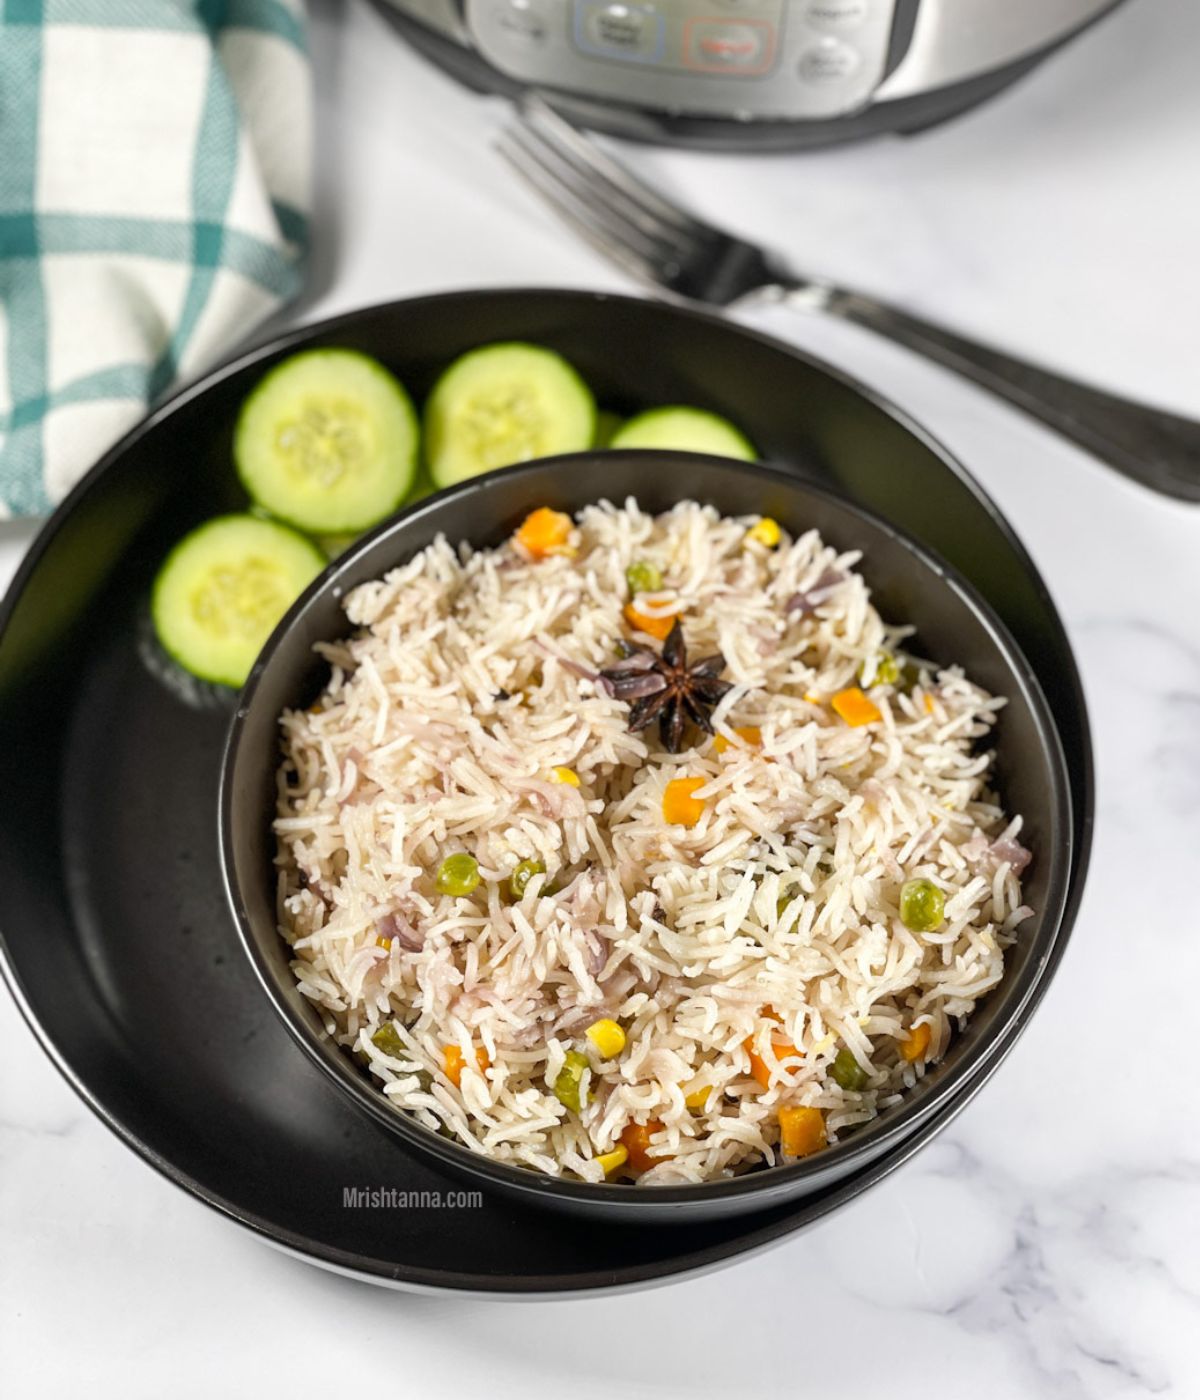 A bowl of vegetable pulao is on the table with cucumber slices.